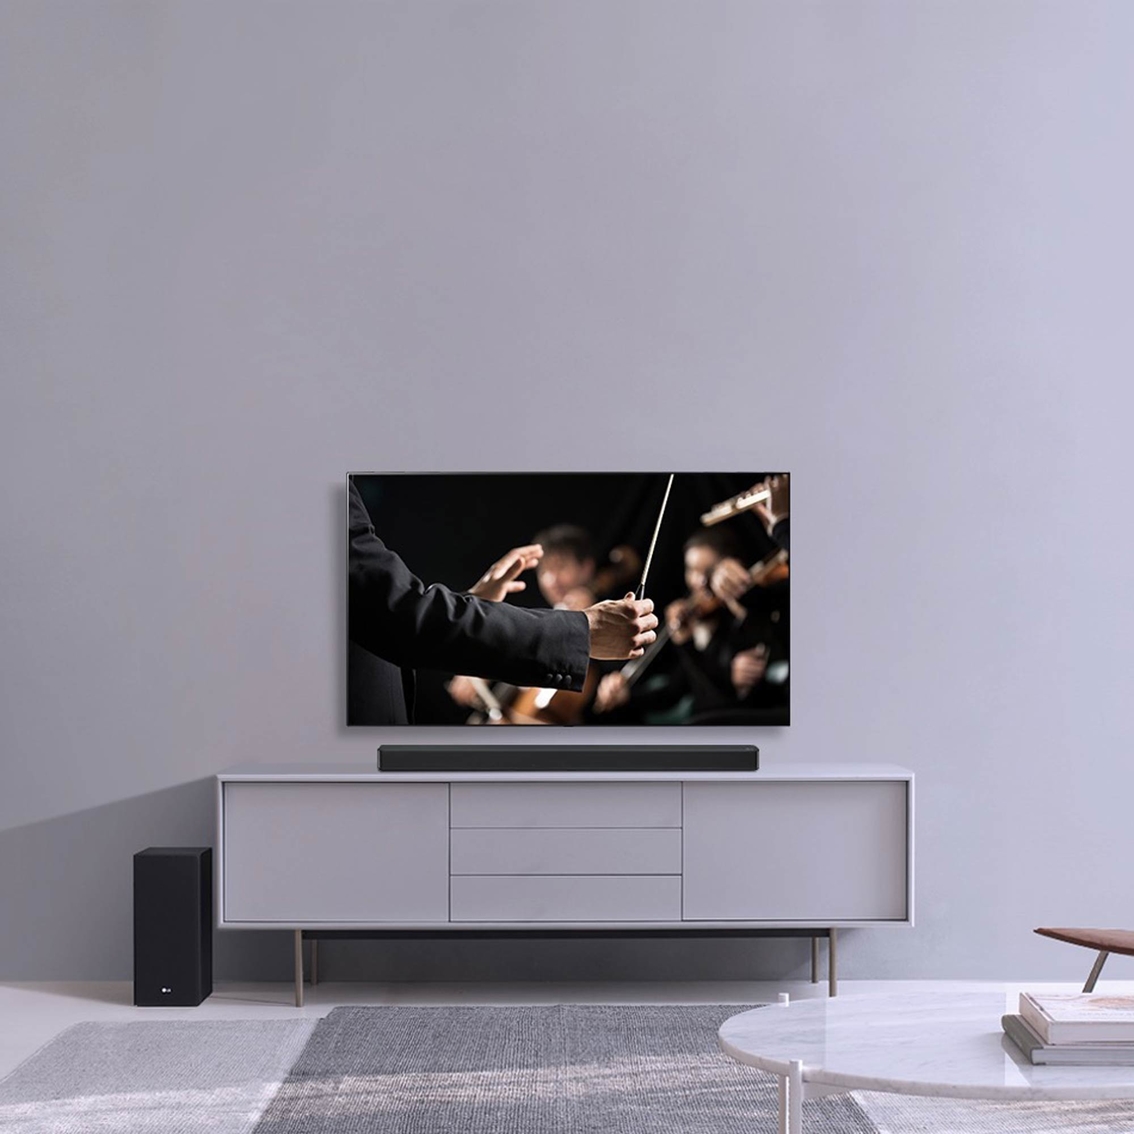 LG 3.1 Channel High Res Audio Sound Bar with Built-In Chromecast - Image 9 of 9